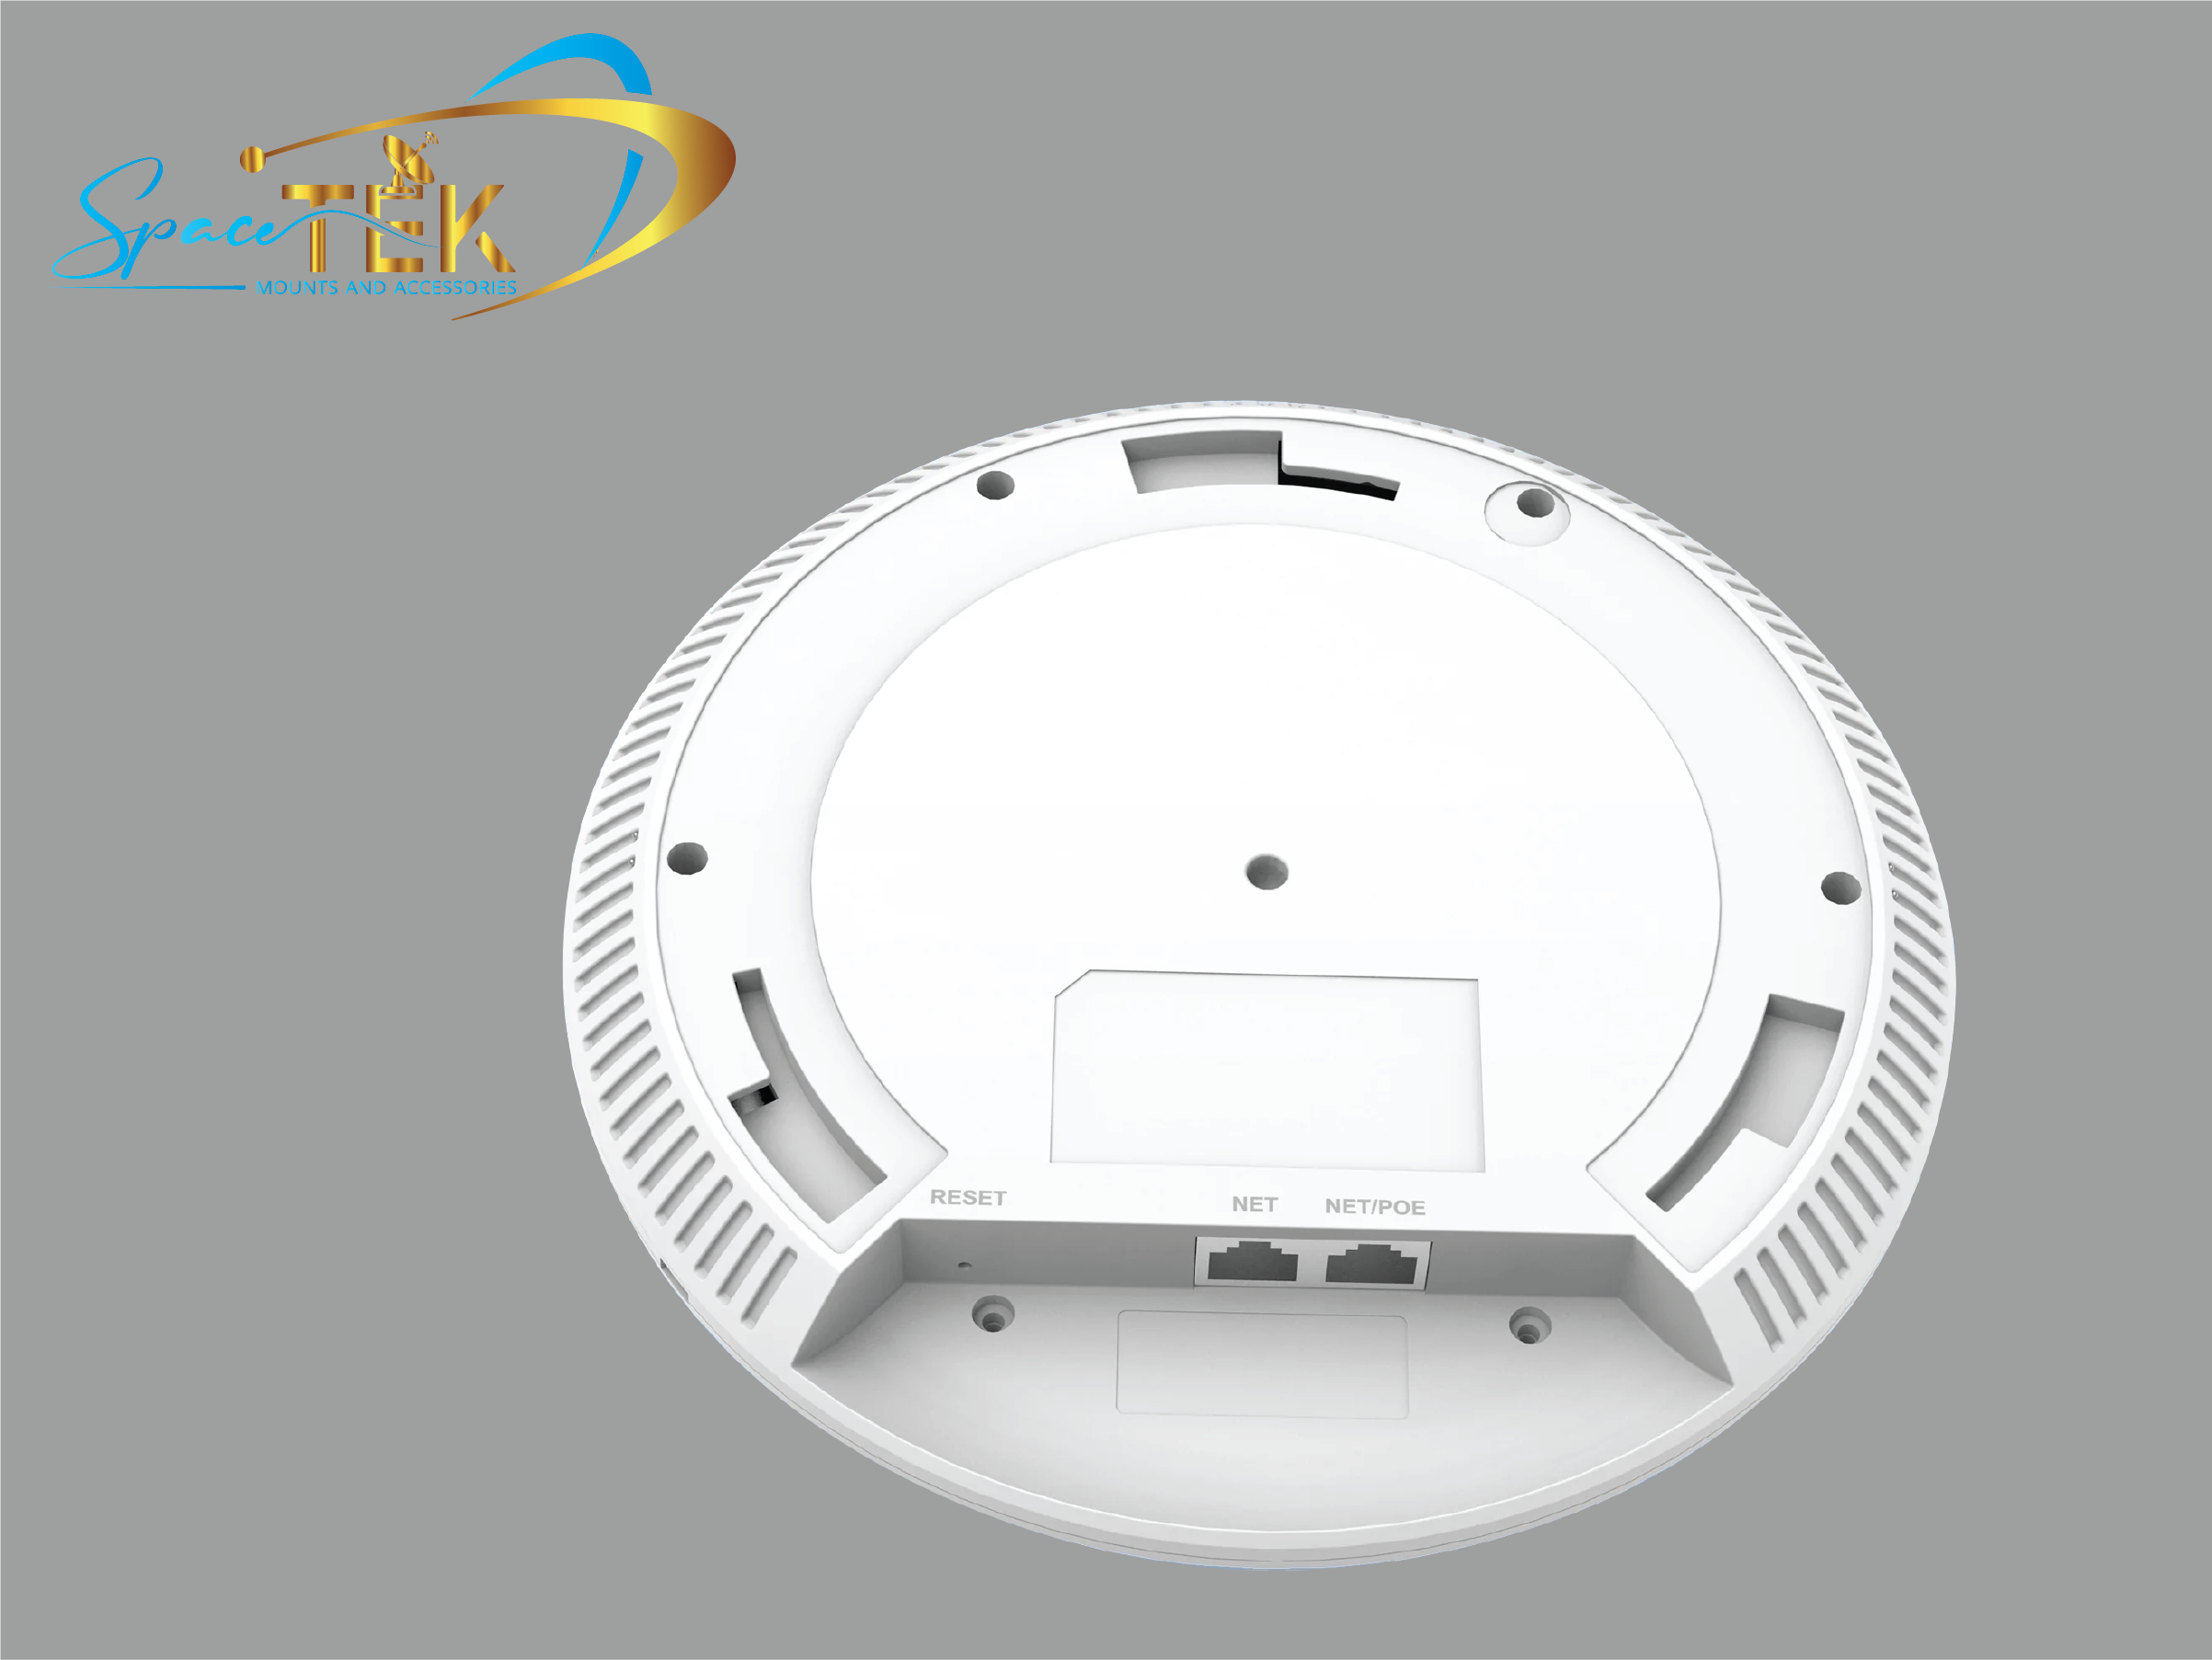 Starlink Compatible - High-performance 4x4:4 Wi-Fi 6 Indoor Access Point